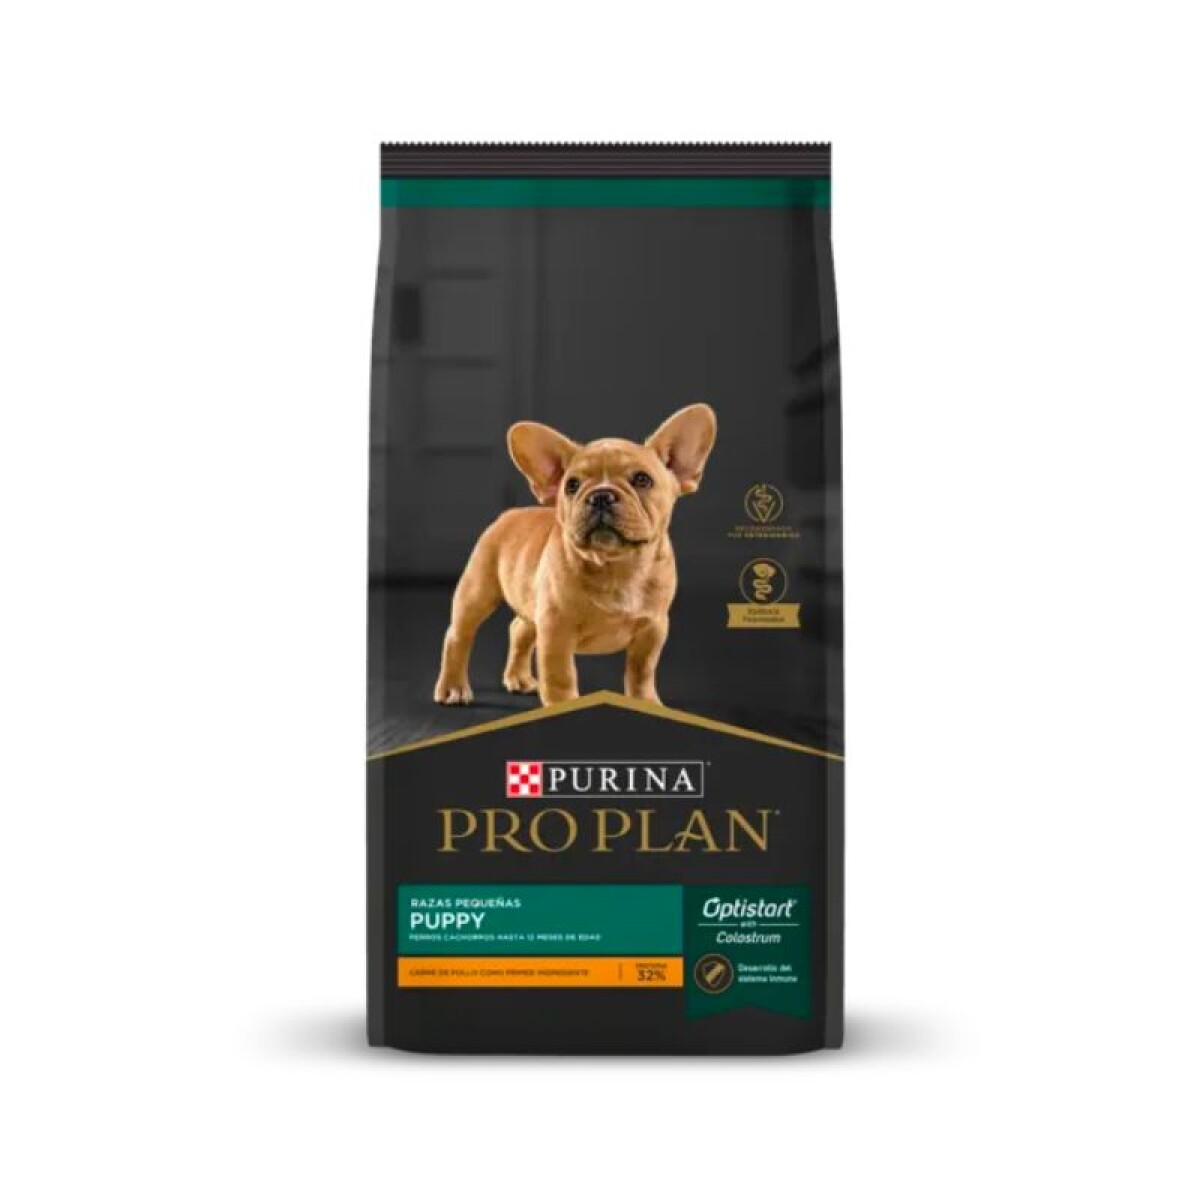 PROPLAN PUPPY SMALL BREEDS 3 KG - Proplan Puppy Small Breeds 3 Kg 